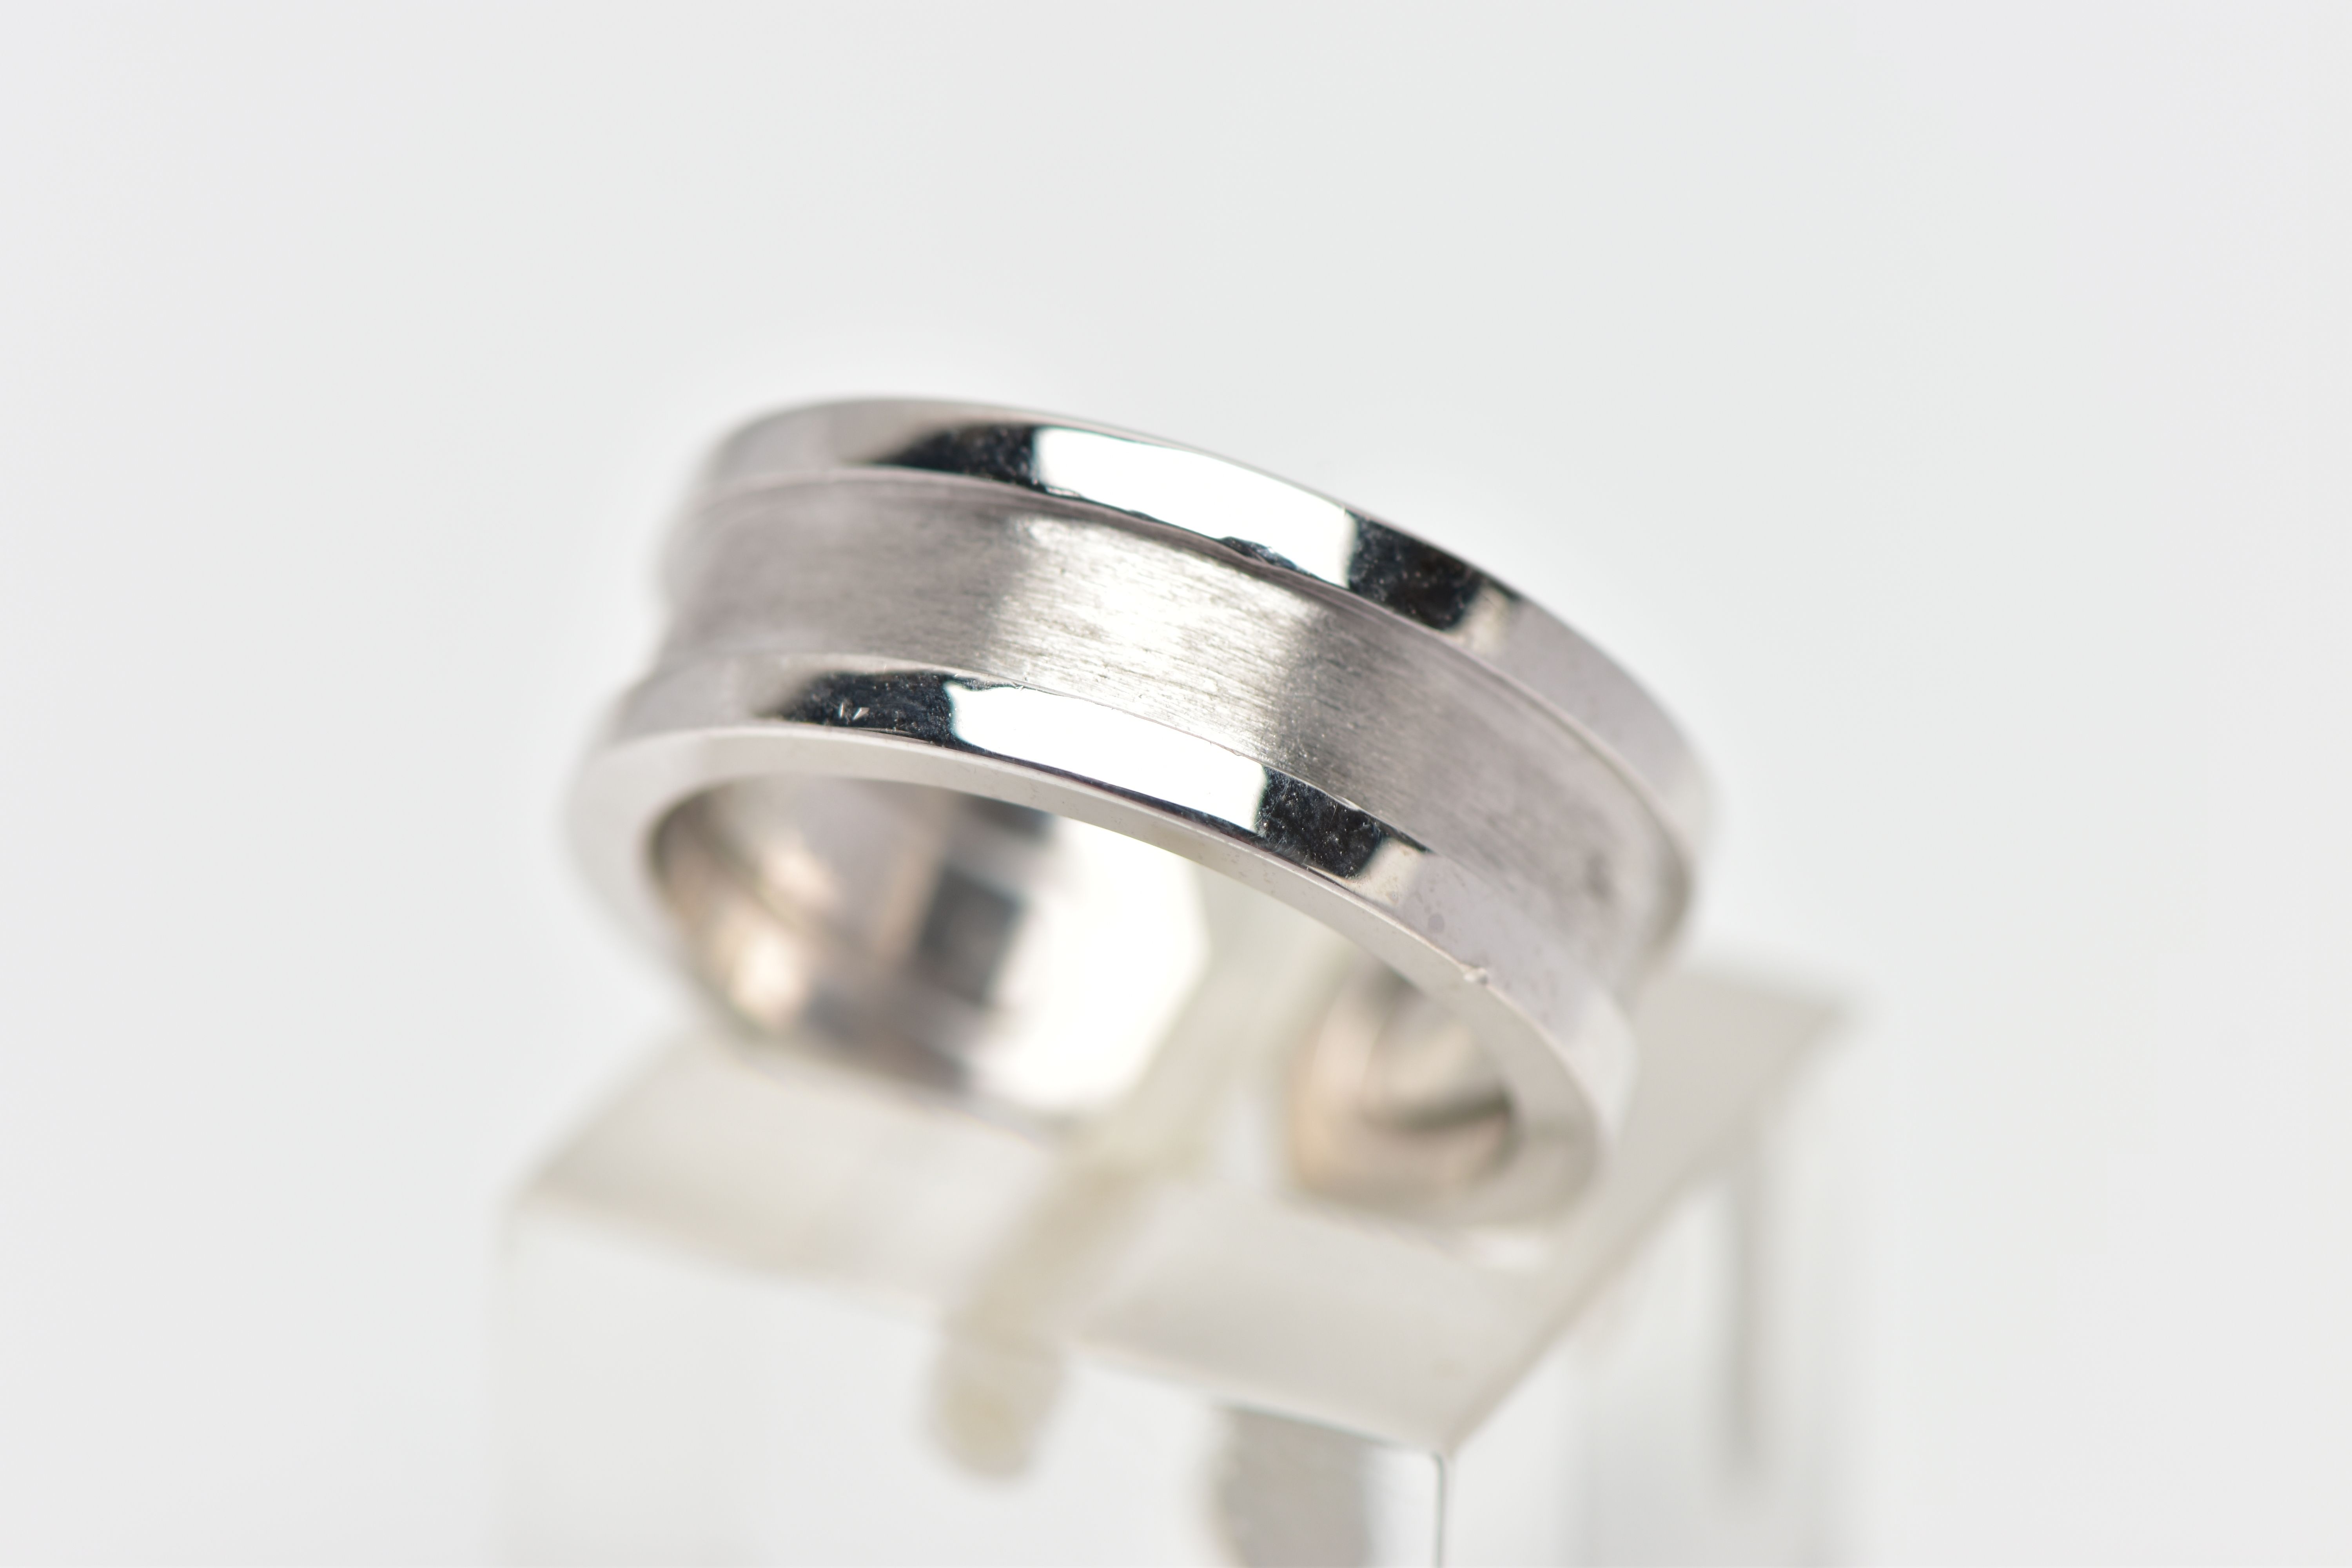 A 'C DE CARTIER' RING BY CARTIER, with polished and brushed detail, signed and numbered Cartier